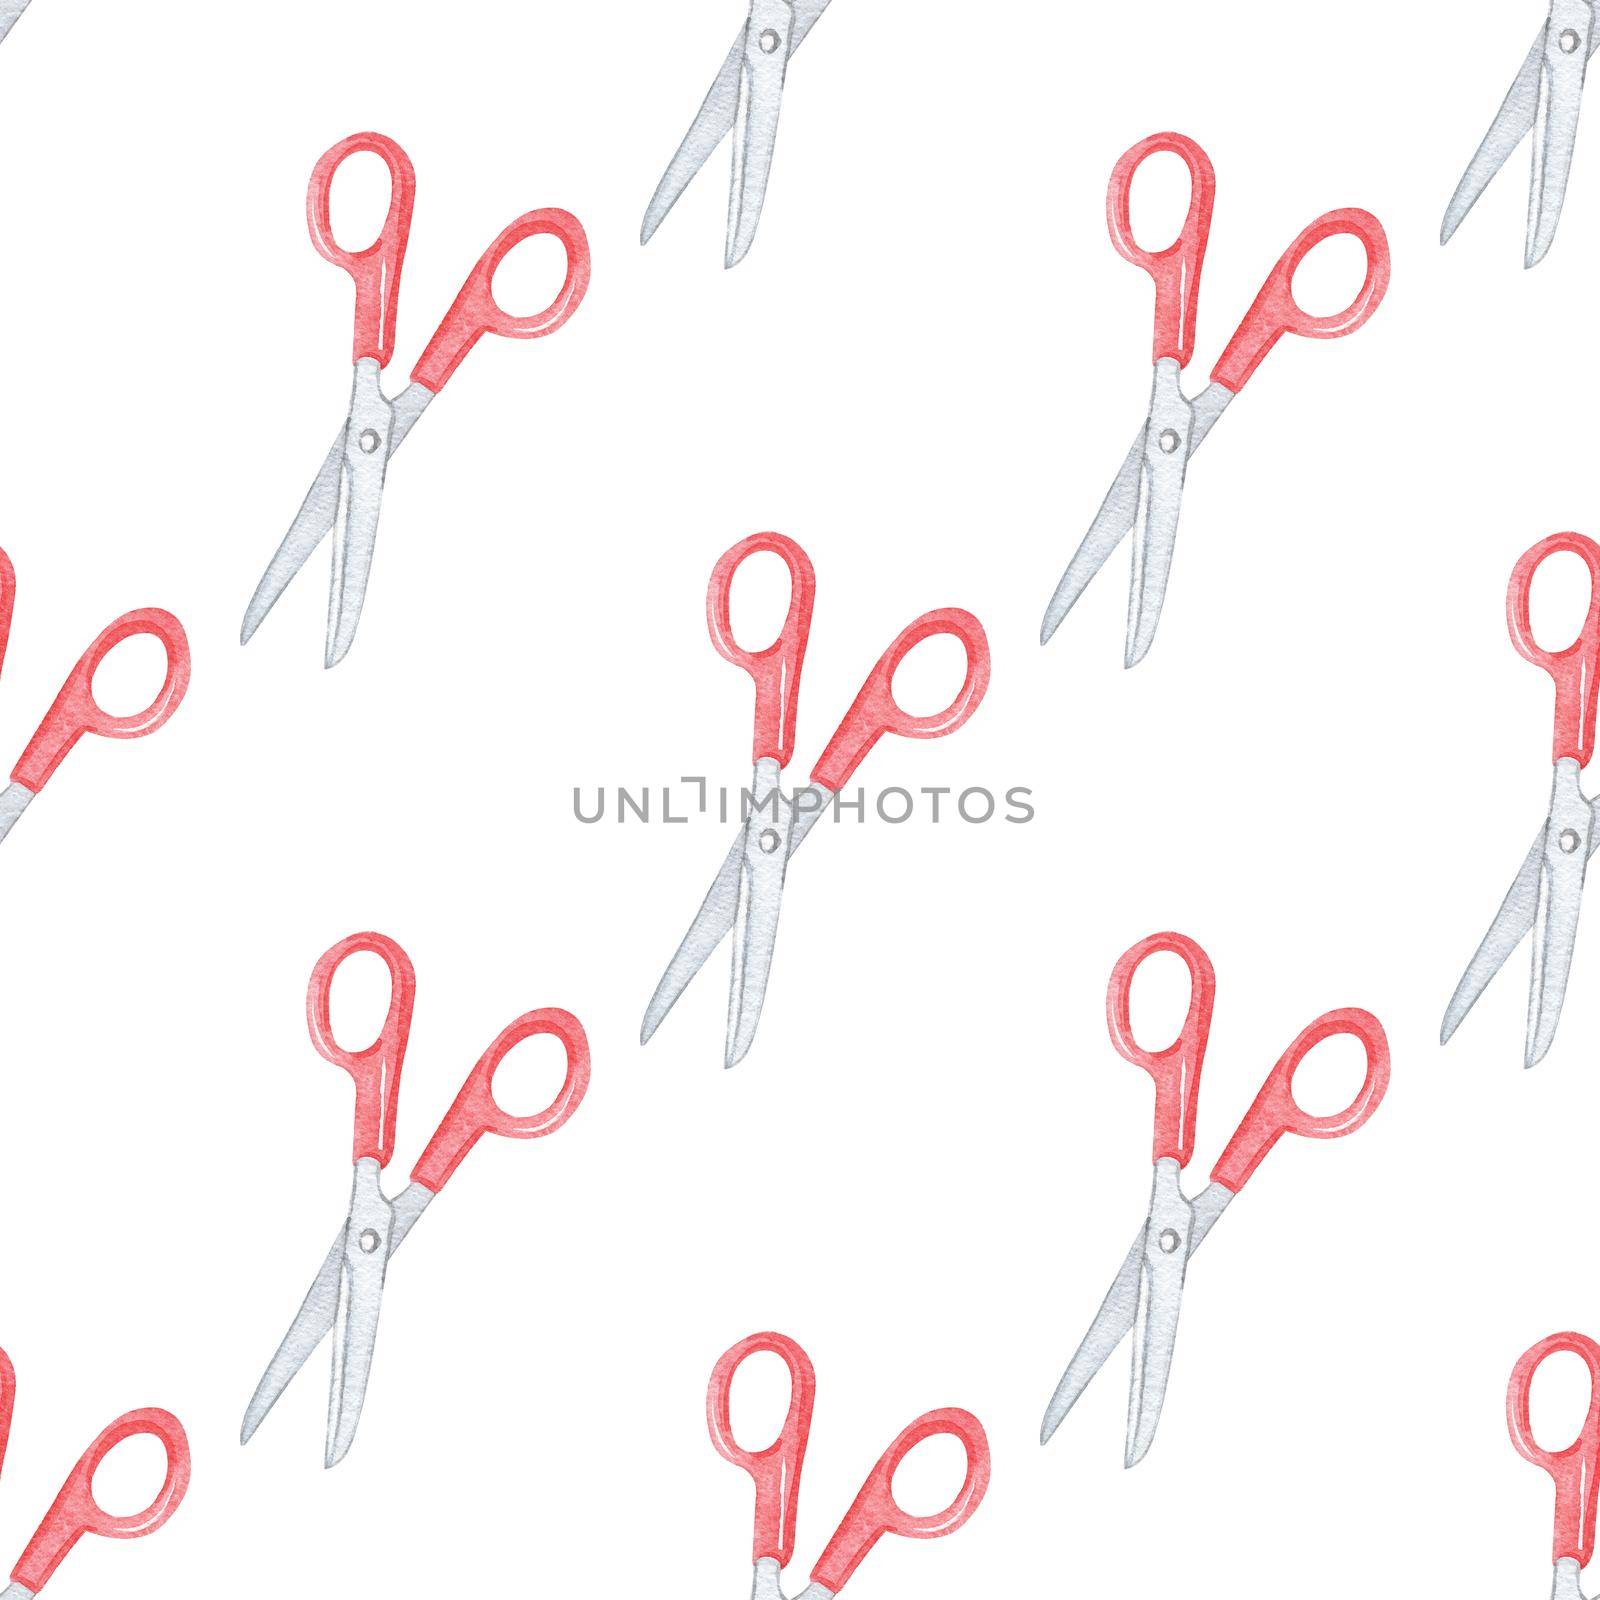 Watercolor red scissors seamless pattern on white background